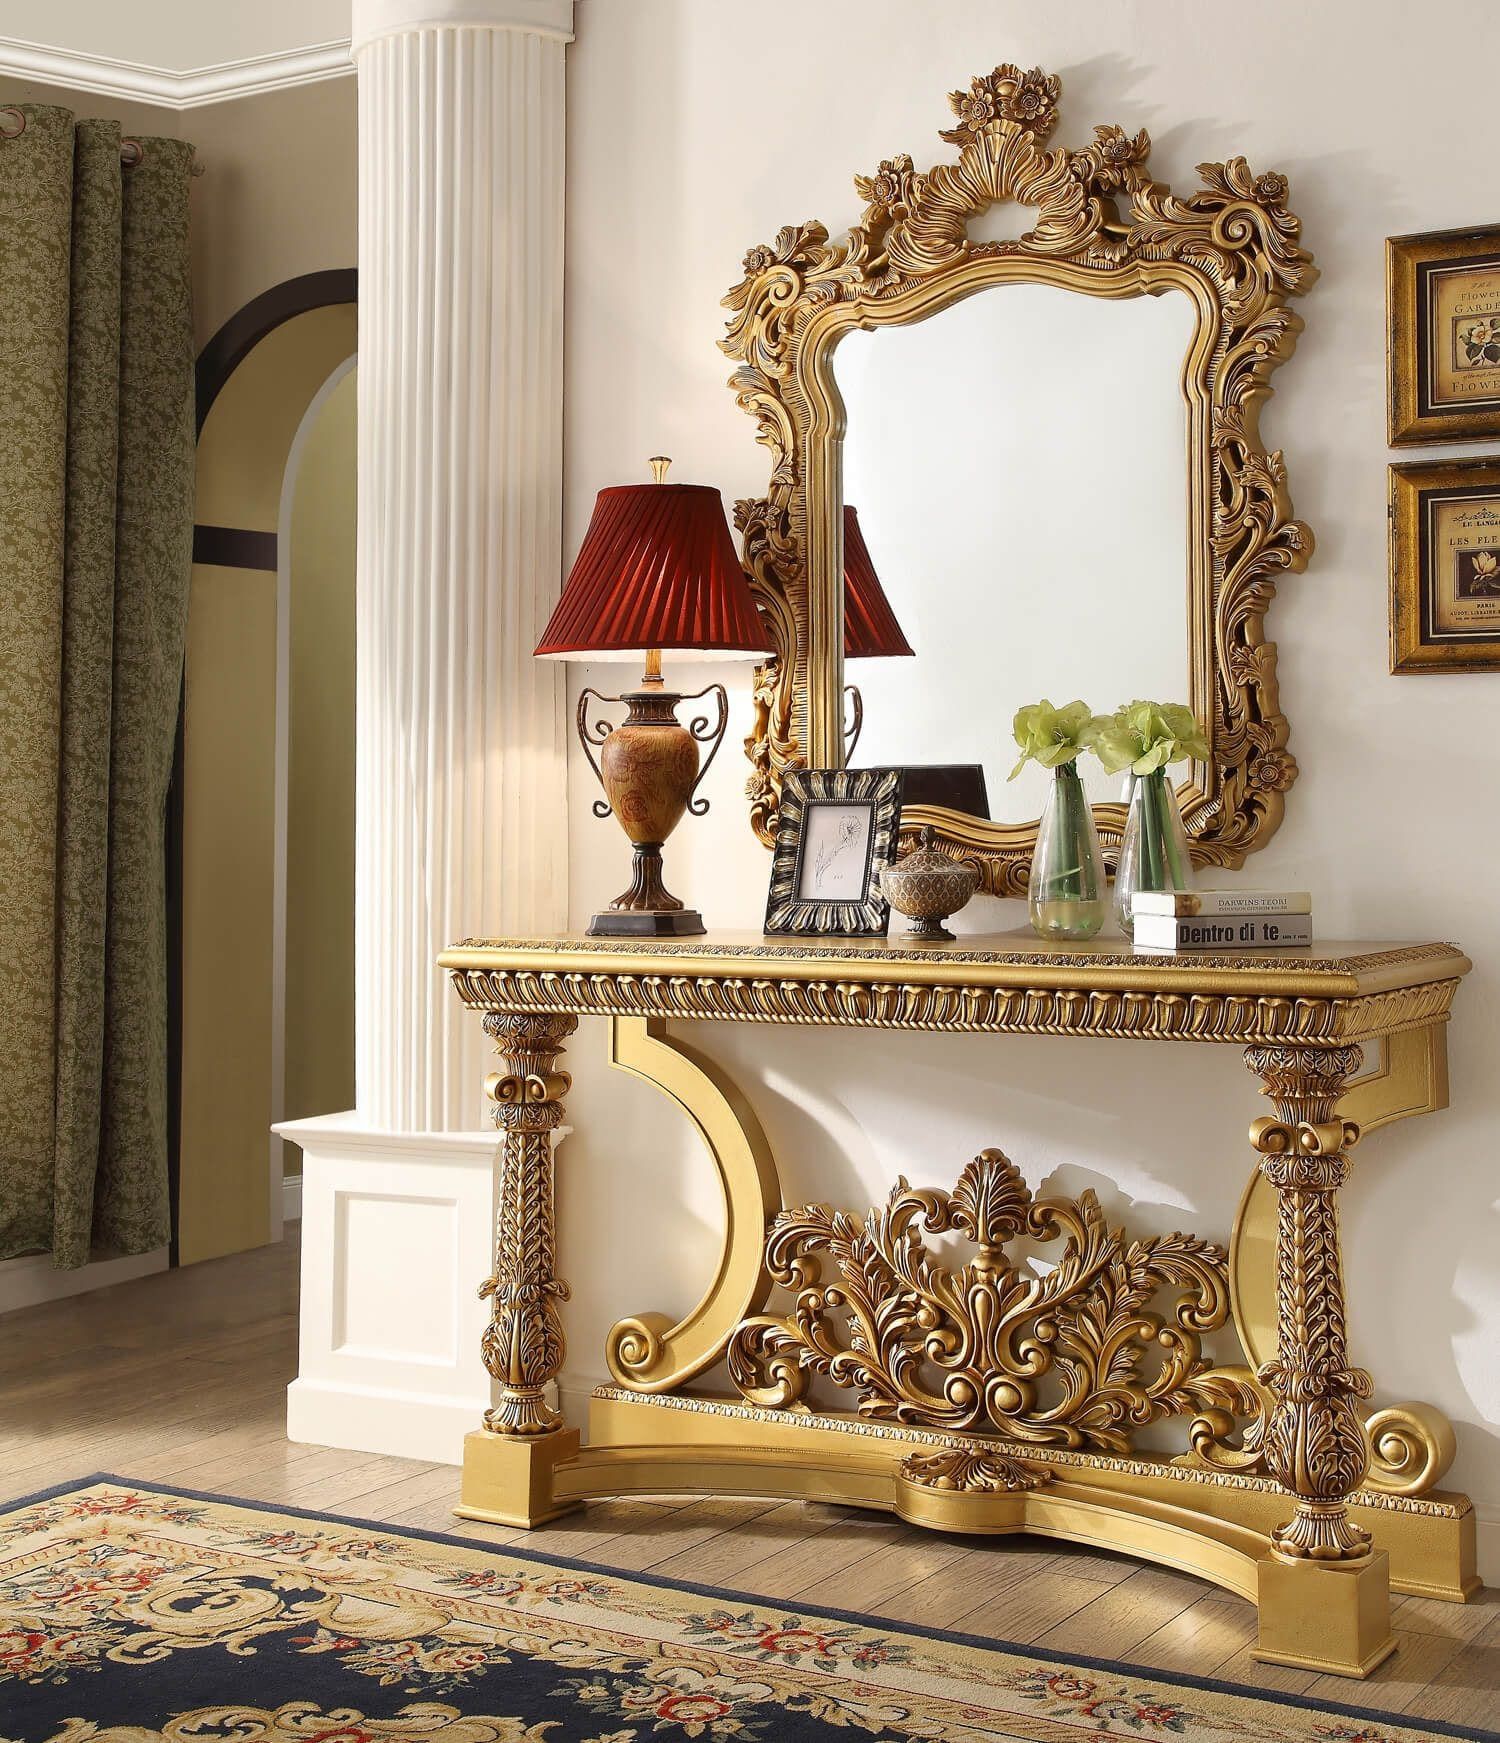 Hd 8016 Stm Gold Tone Finish Console Table With Mirror – Luchy Amor With Metallic Gold Console Tables (View 4 of 20)